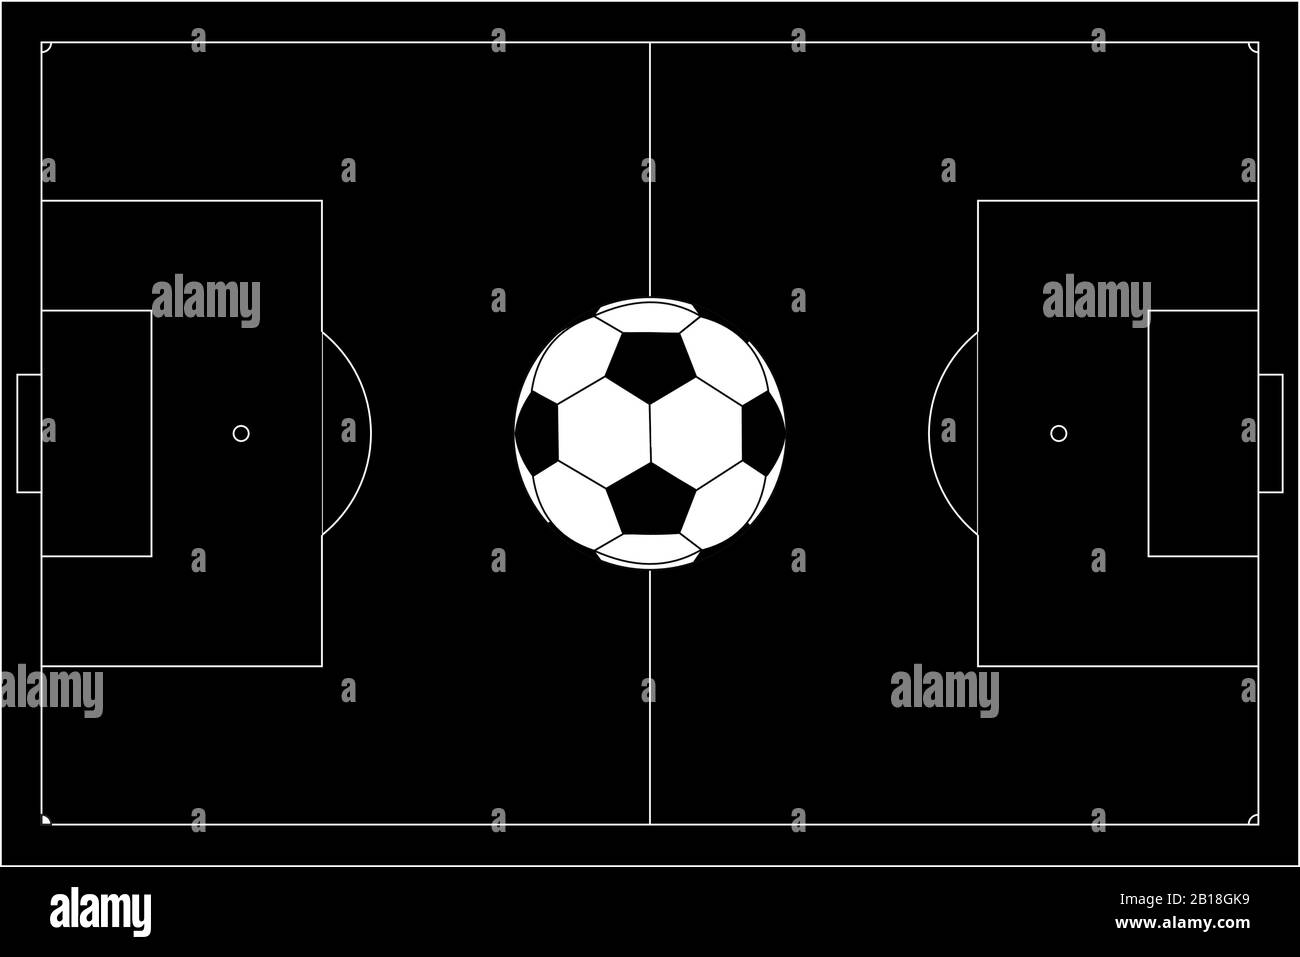 Soccer ball on football pitch. Black outline Stock Vector